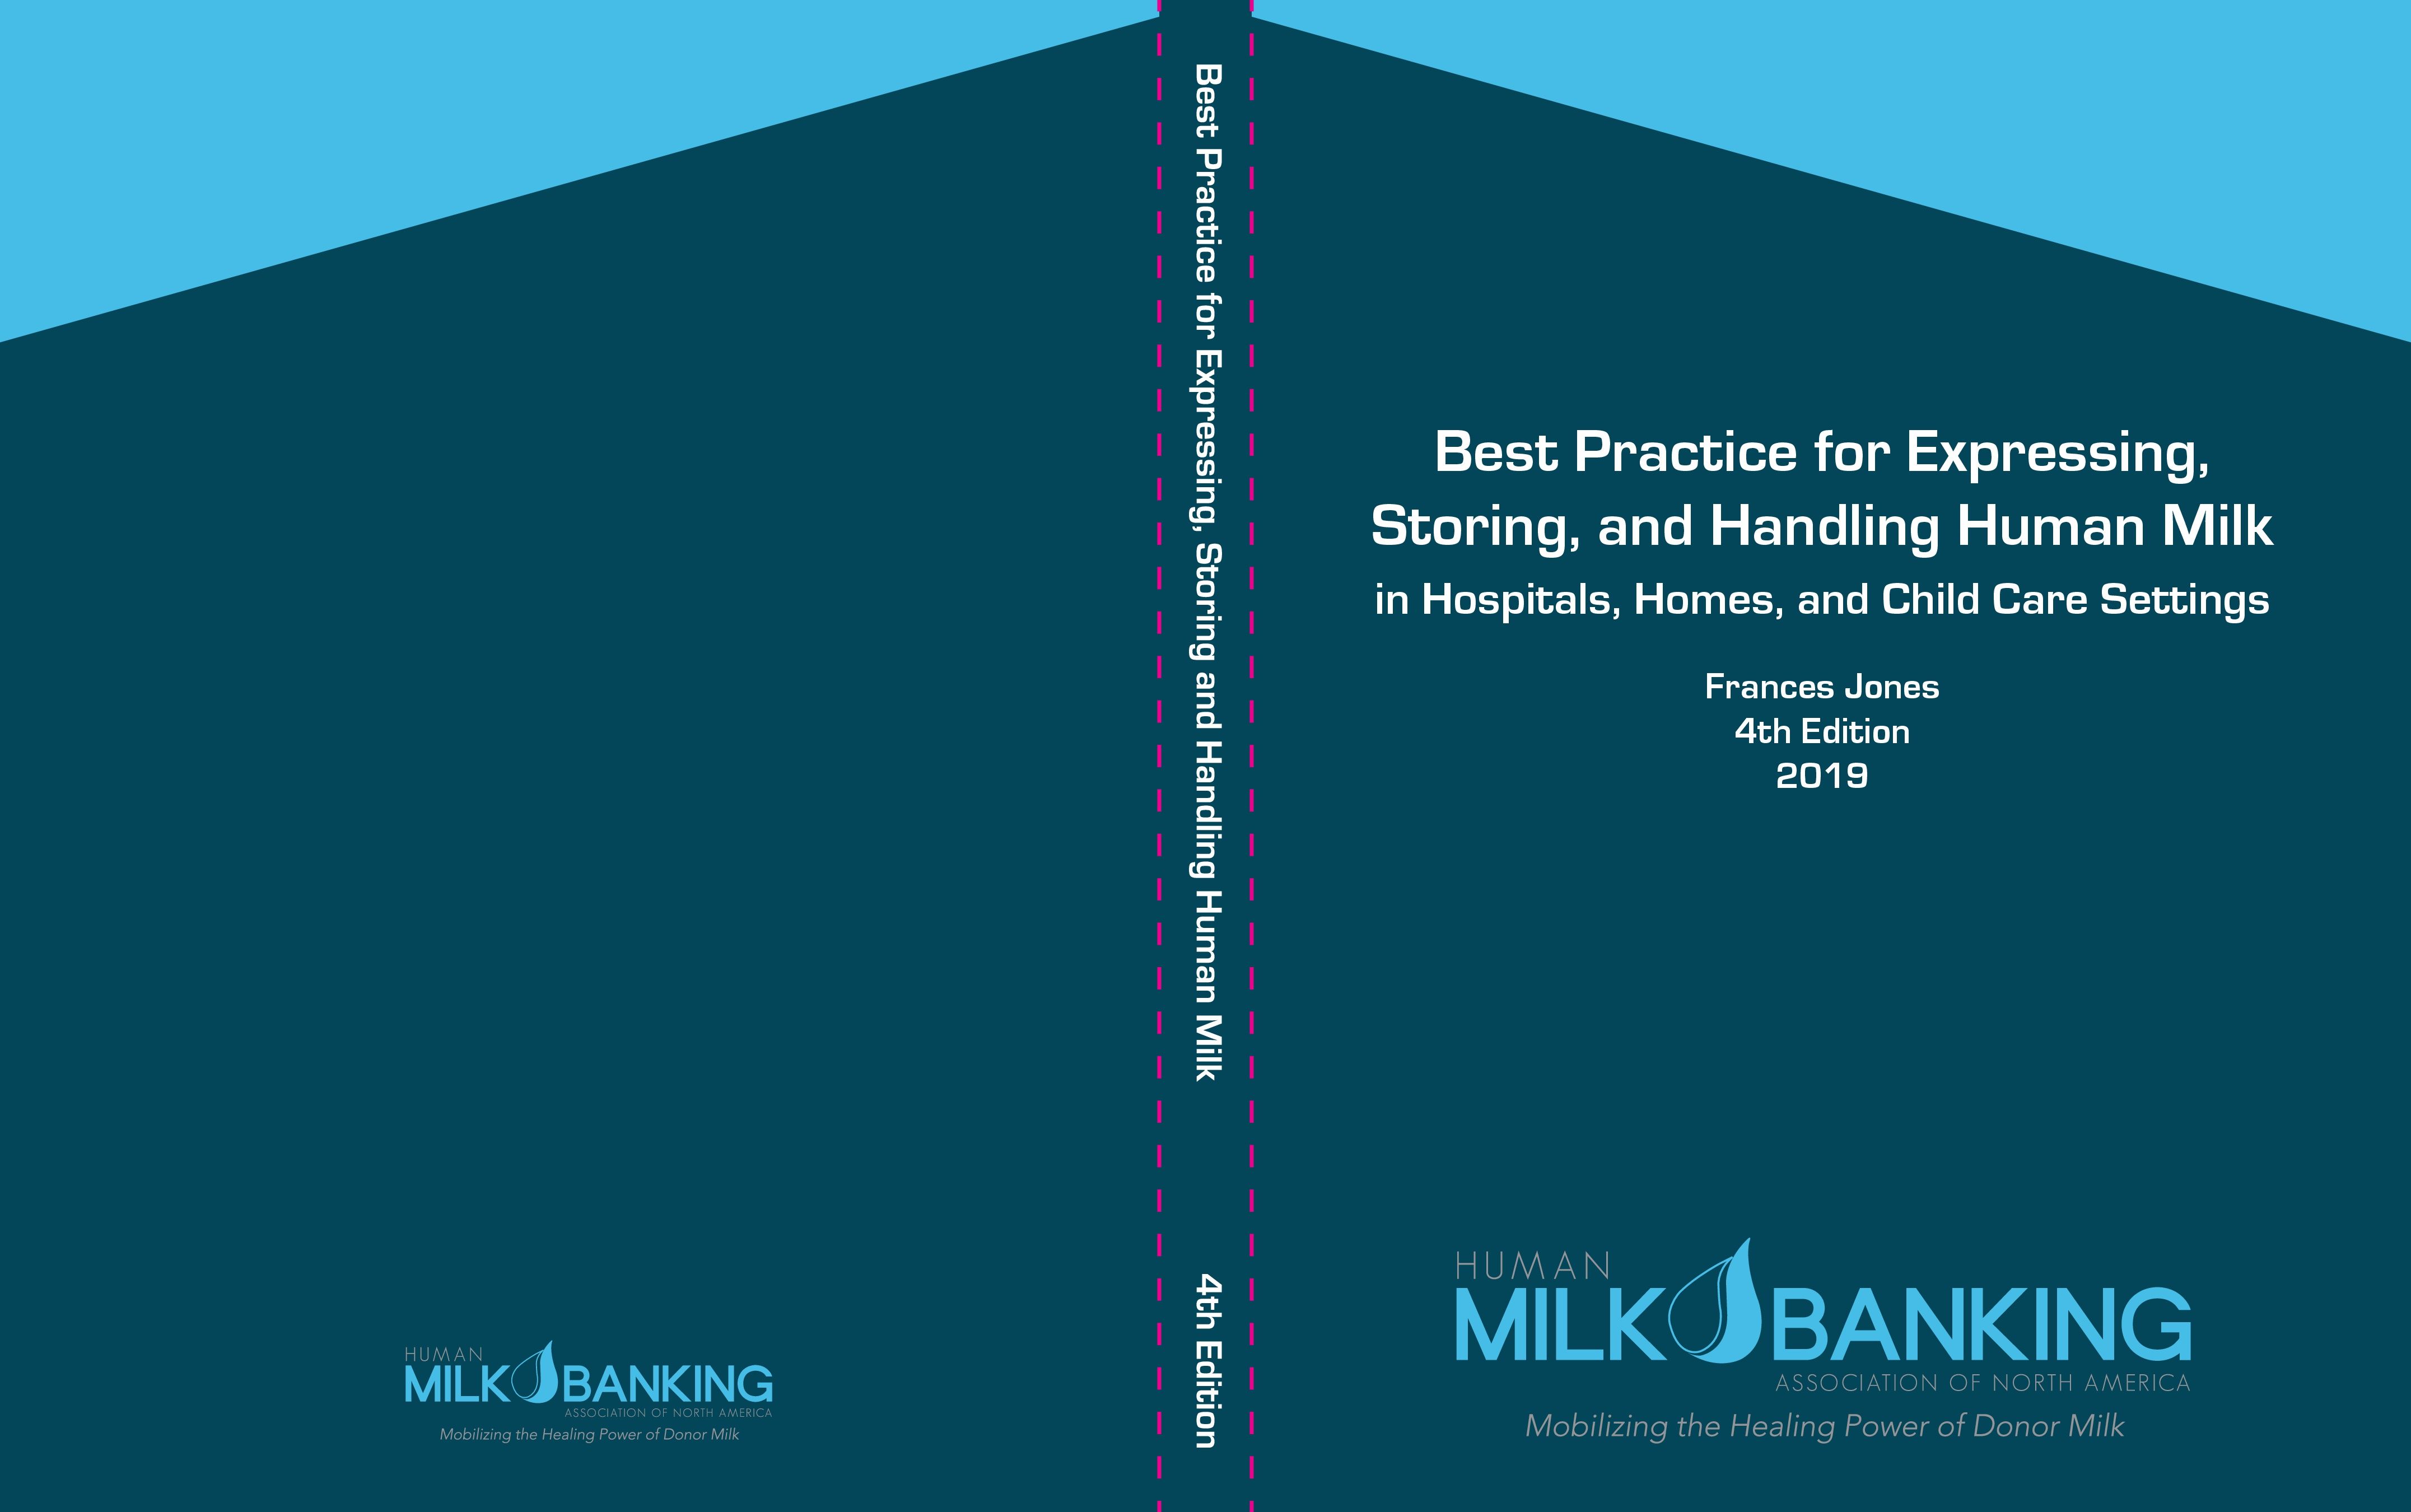 2019 Guide on Handling Human Milk Has New Thawing Recommendations, Over 1000 Cited References, and More